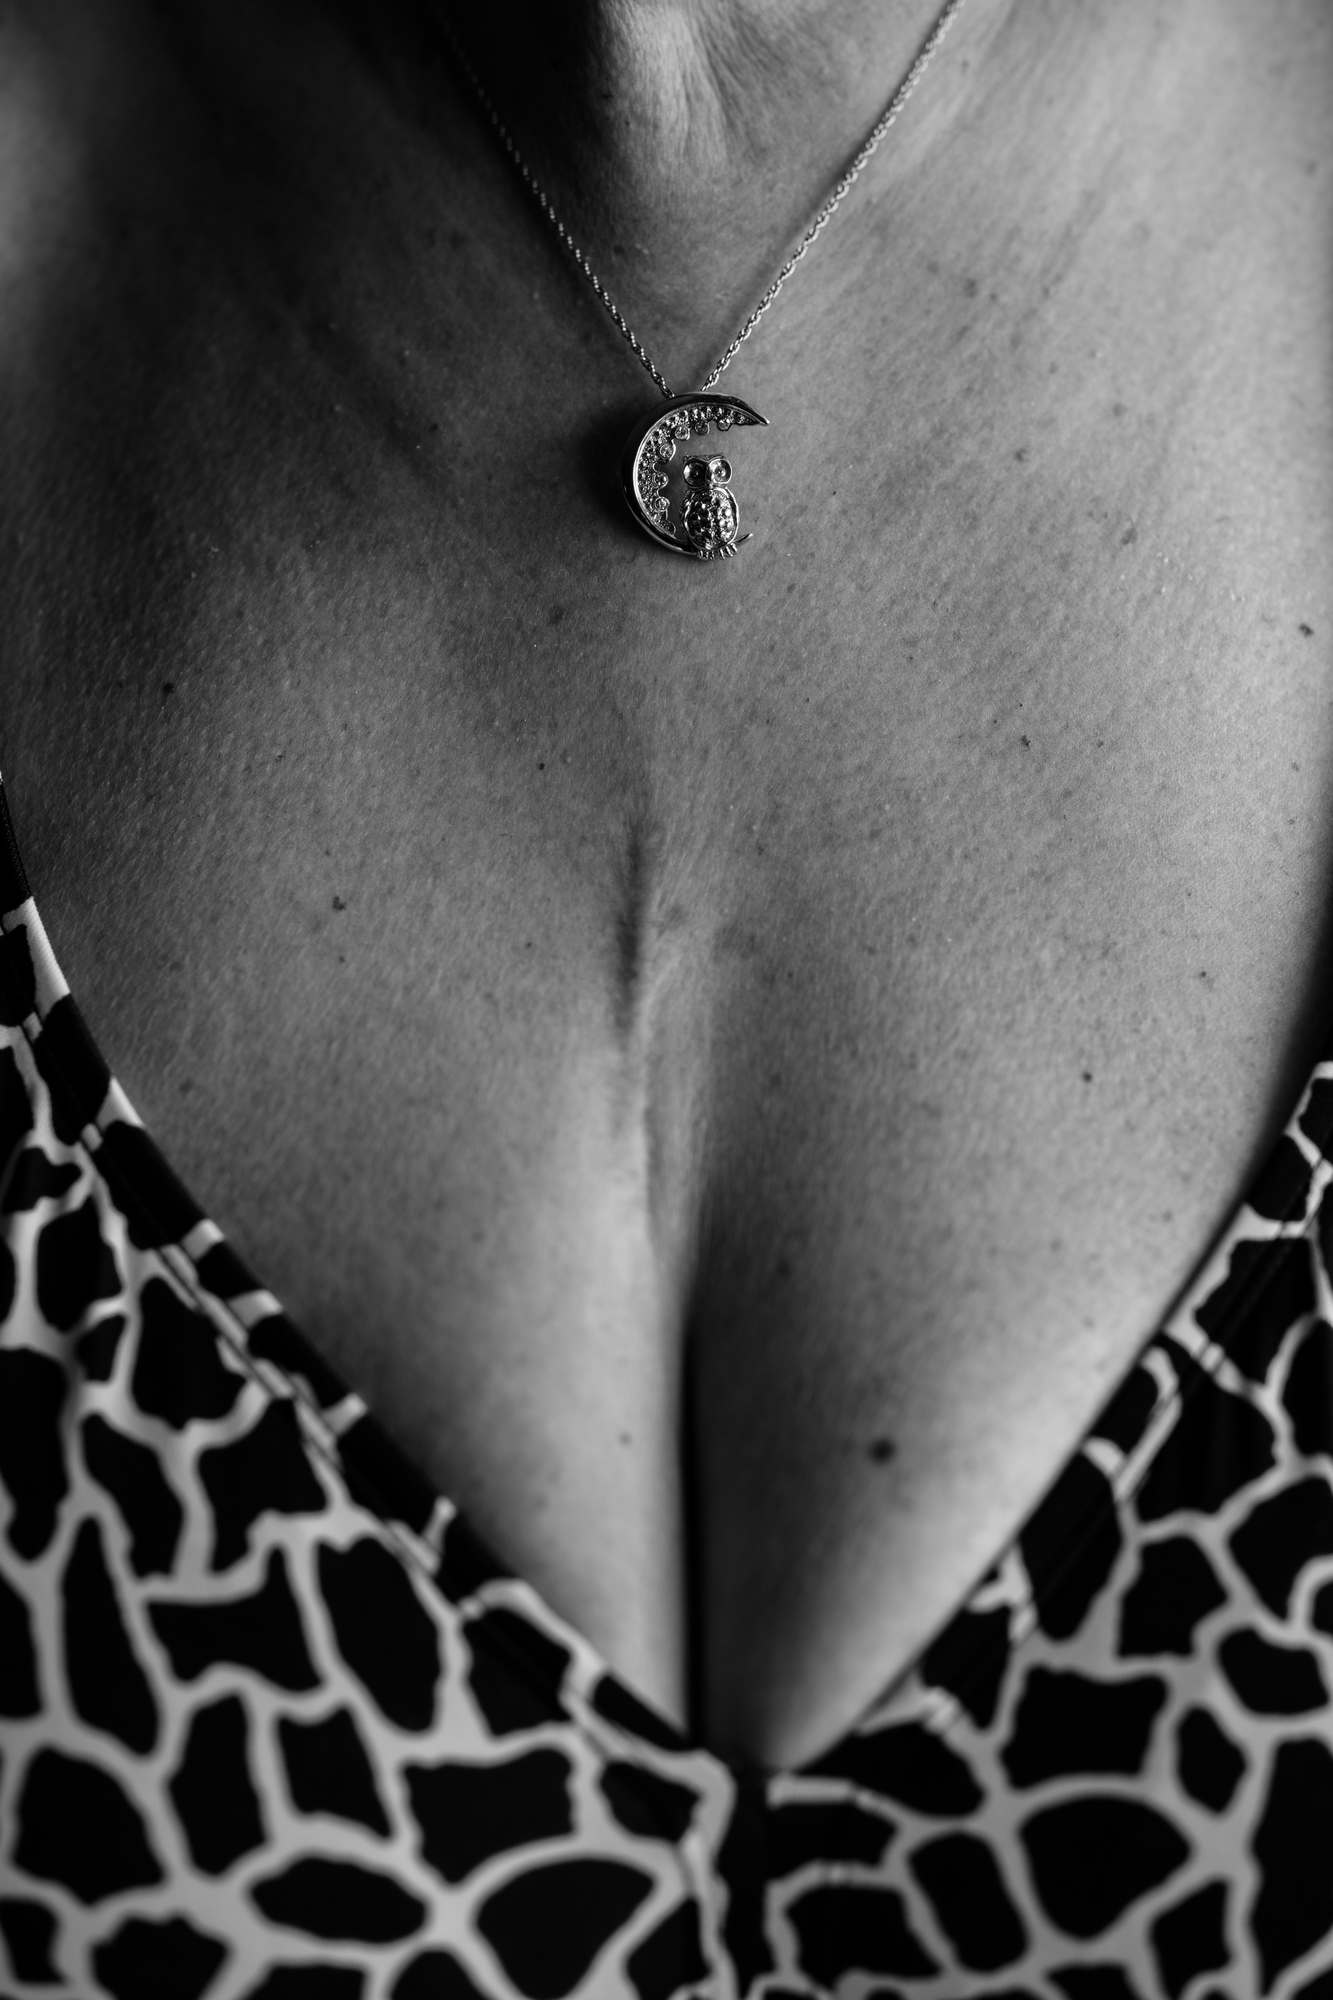 A black and white photo of a woman's chest with a moon neckalce and a scar above the cleavage